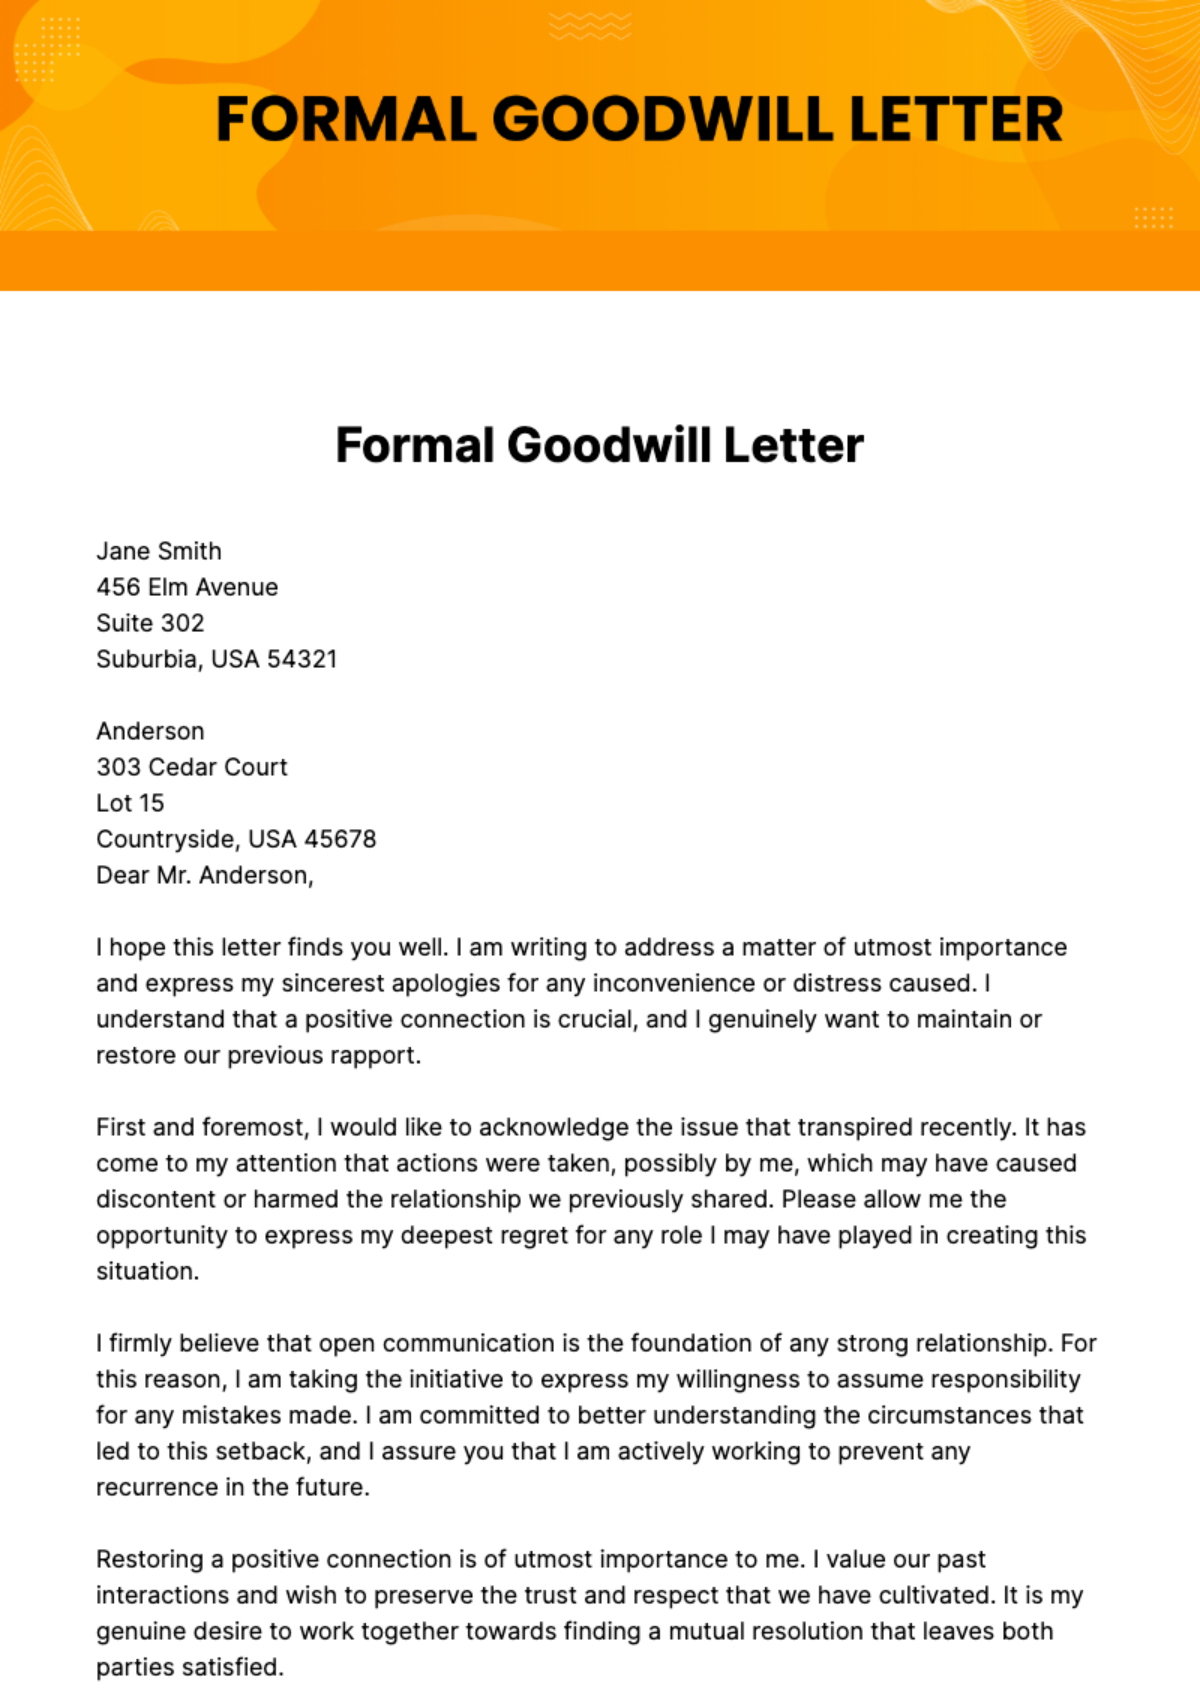 Free Formal Goodwill Letter Template